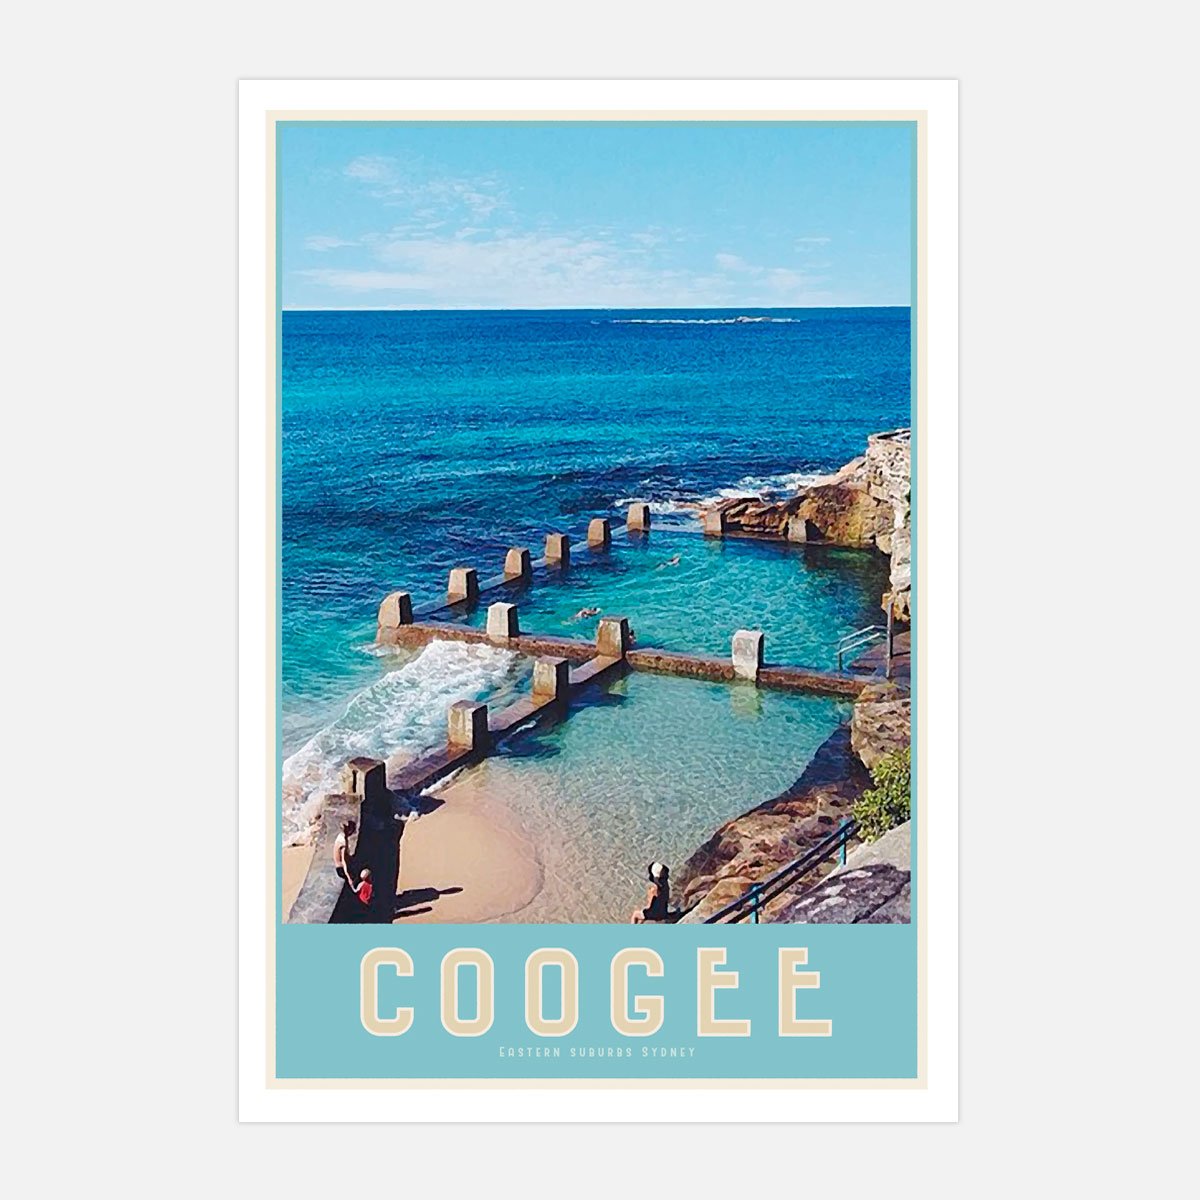 Coogee Pool vintage travel style print by places we luv